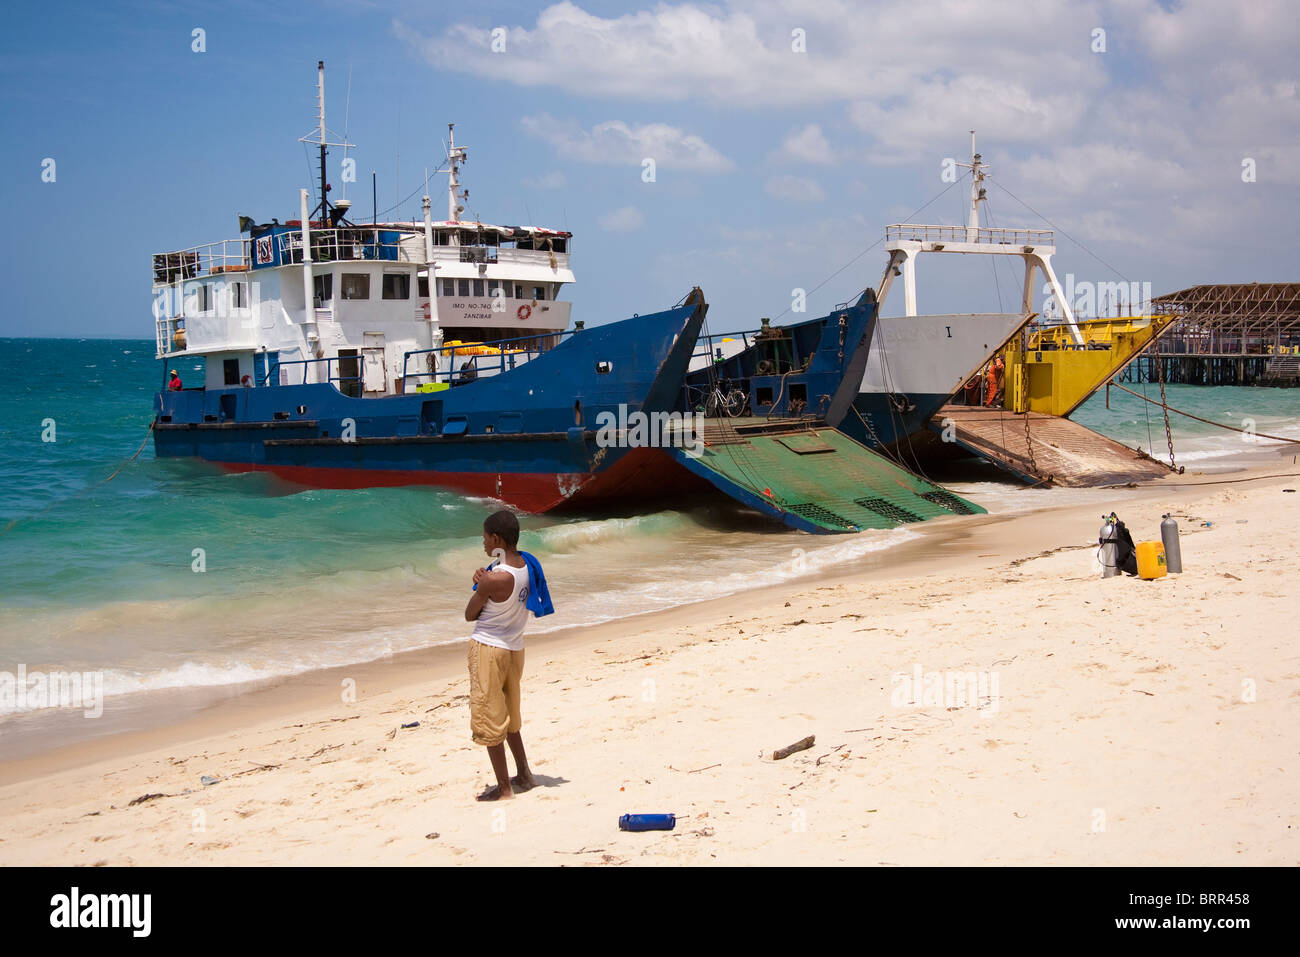 Local man on the beach with two commercial boats with loading ramps Stock Photo